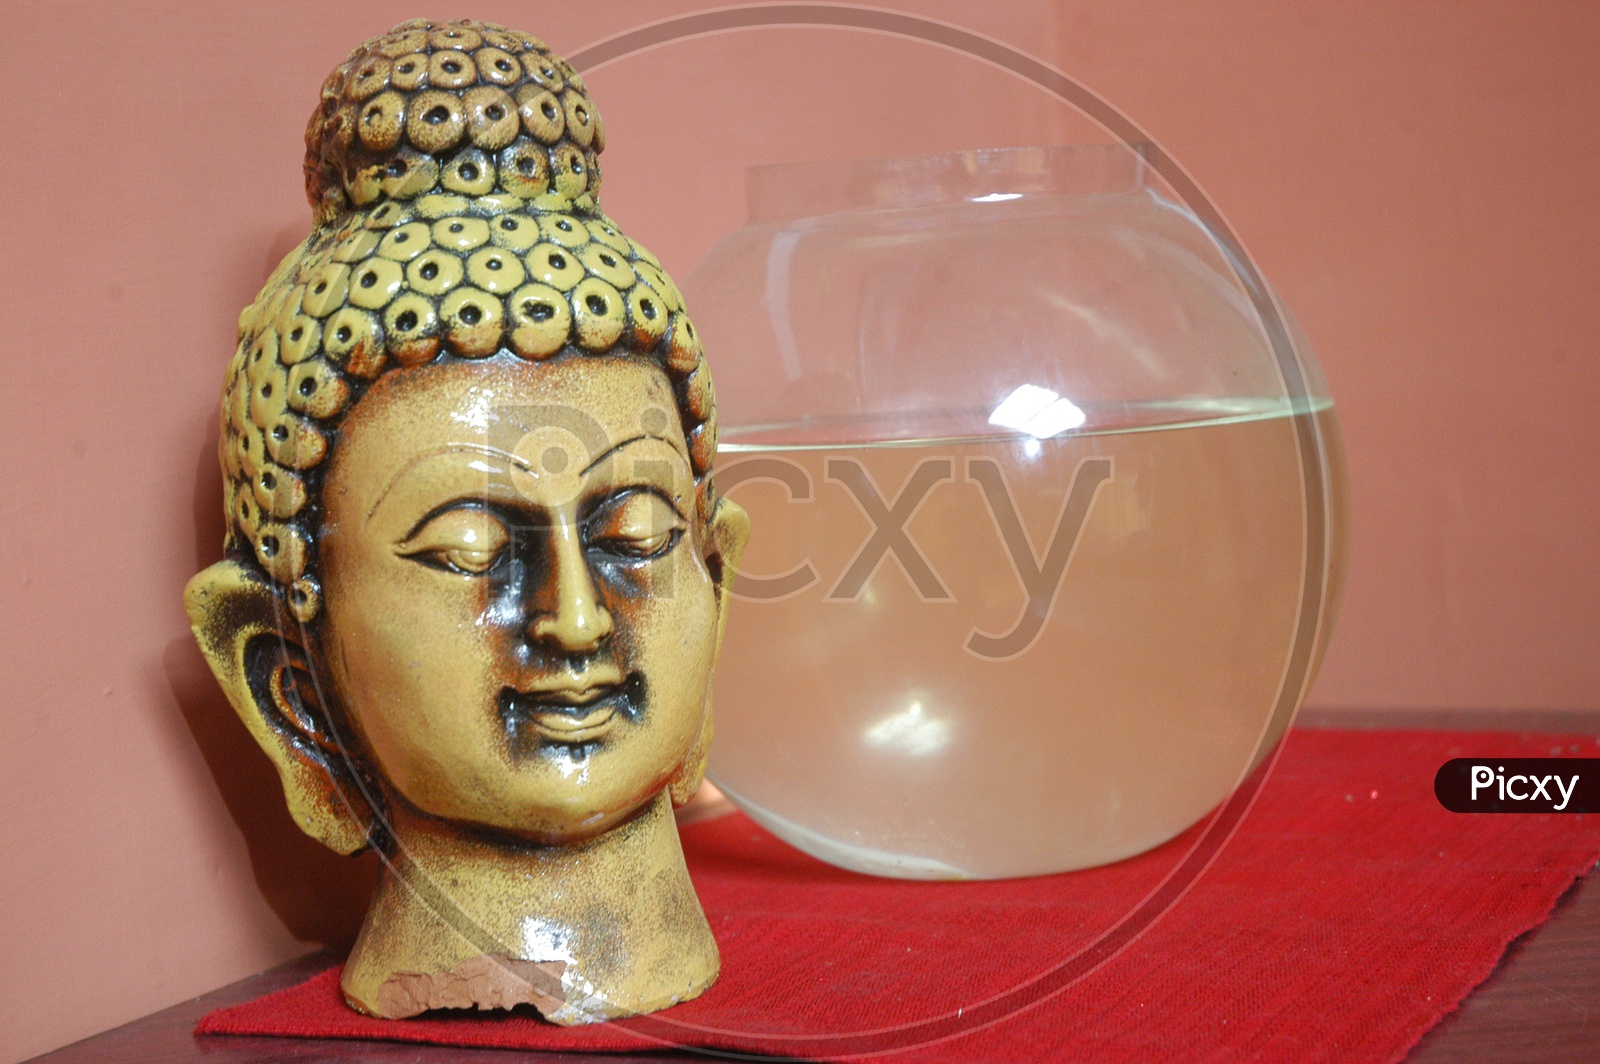 Buddha Statue on a table